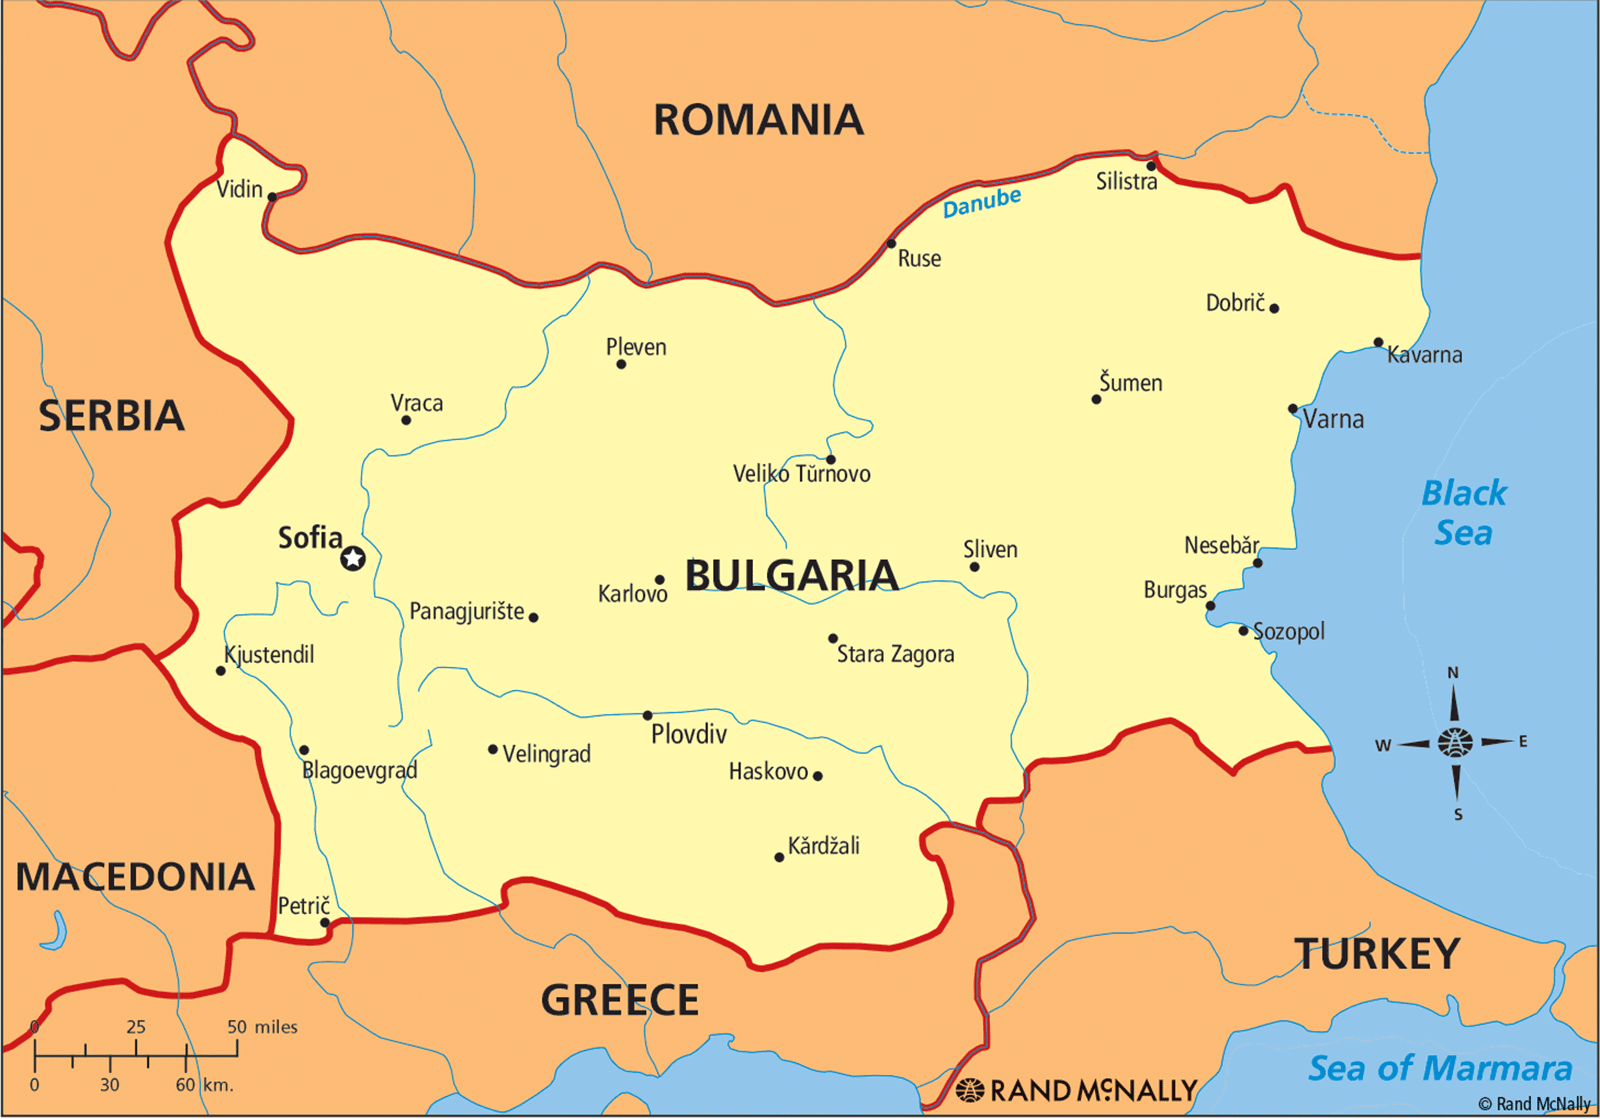 40155-where-is-bulgaria-on-the-map.png (439 KB)